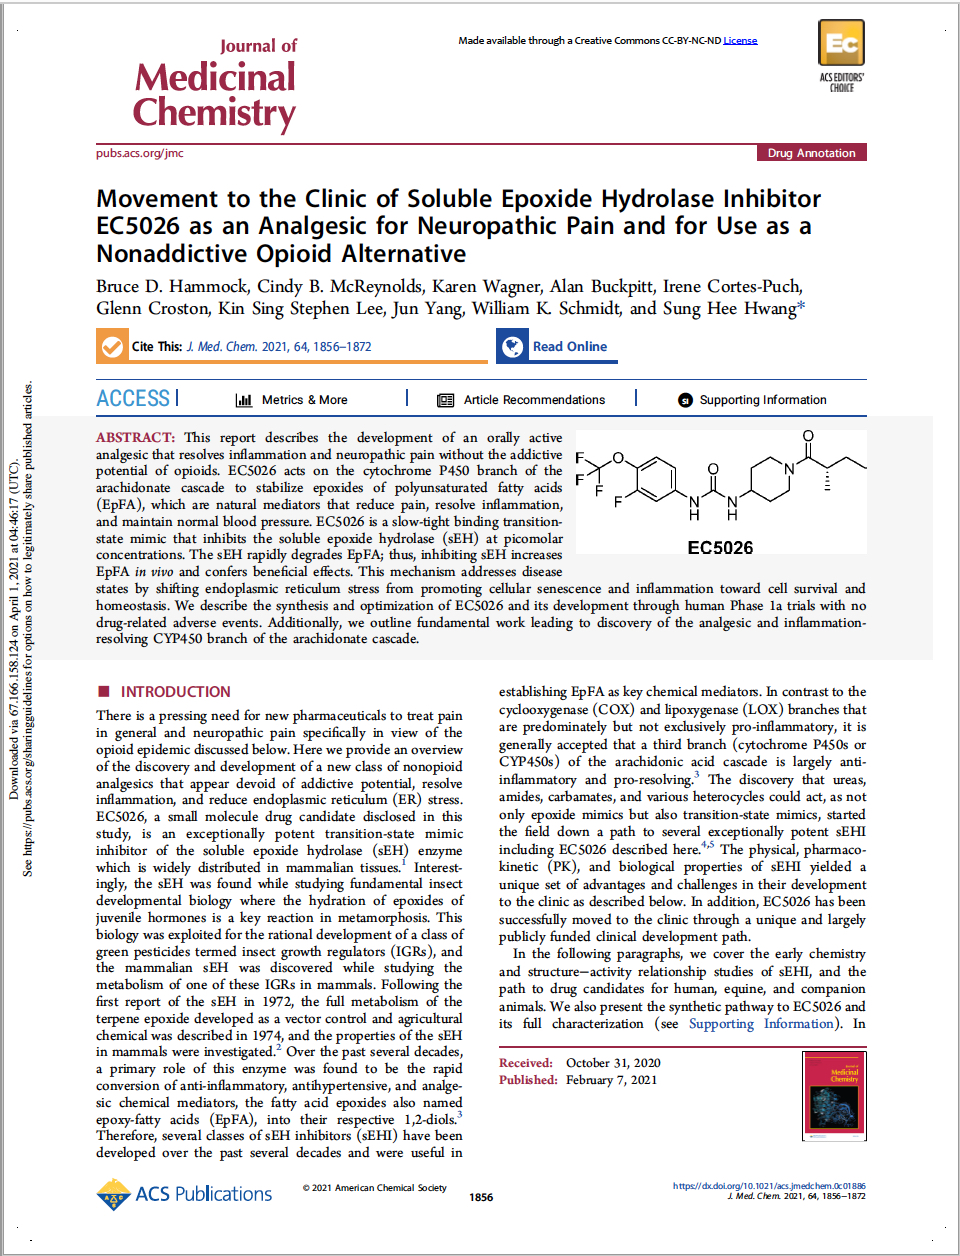 Paper entitled: Movement to the Clinic of Soluble Epoxide Hydrolase Inhibitor EC5026 as an Analgesic for Neuropathic Pain and for Use as a Nonaddictive Opioid Alternative